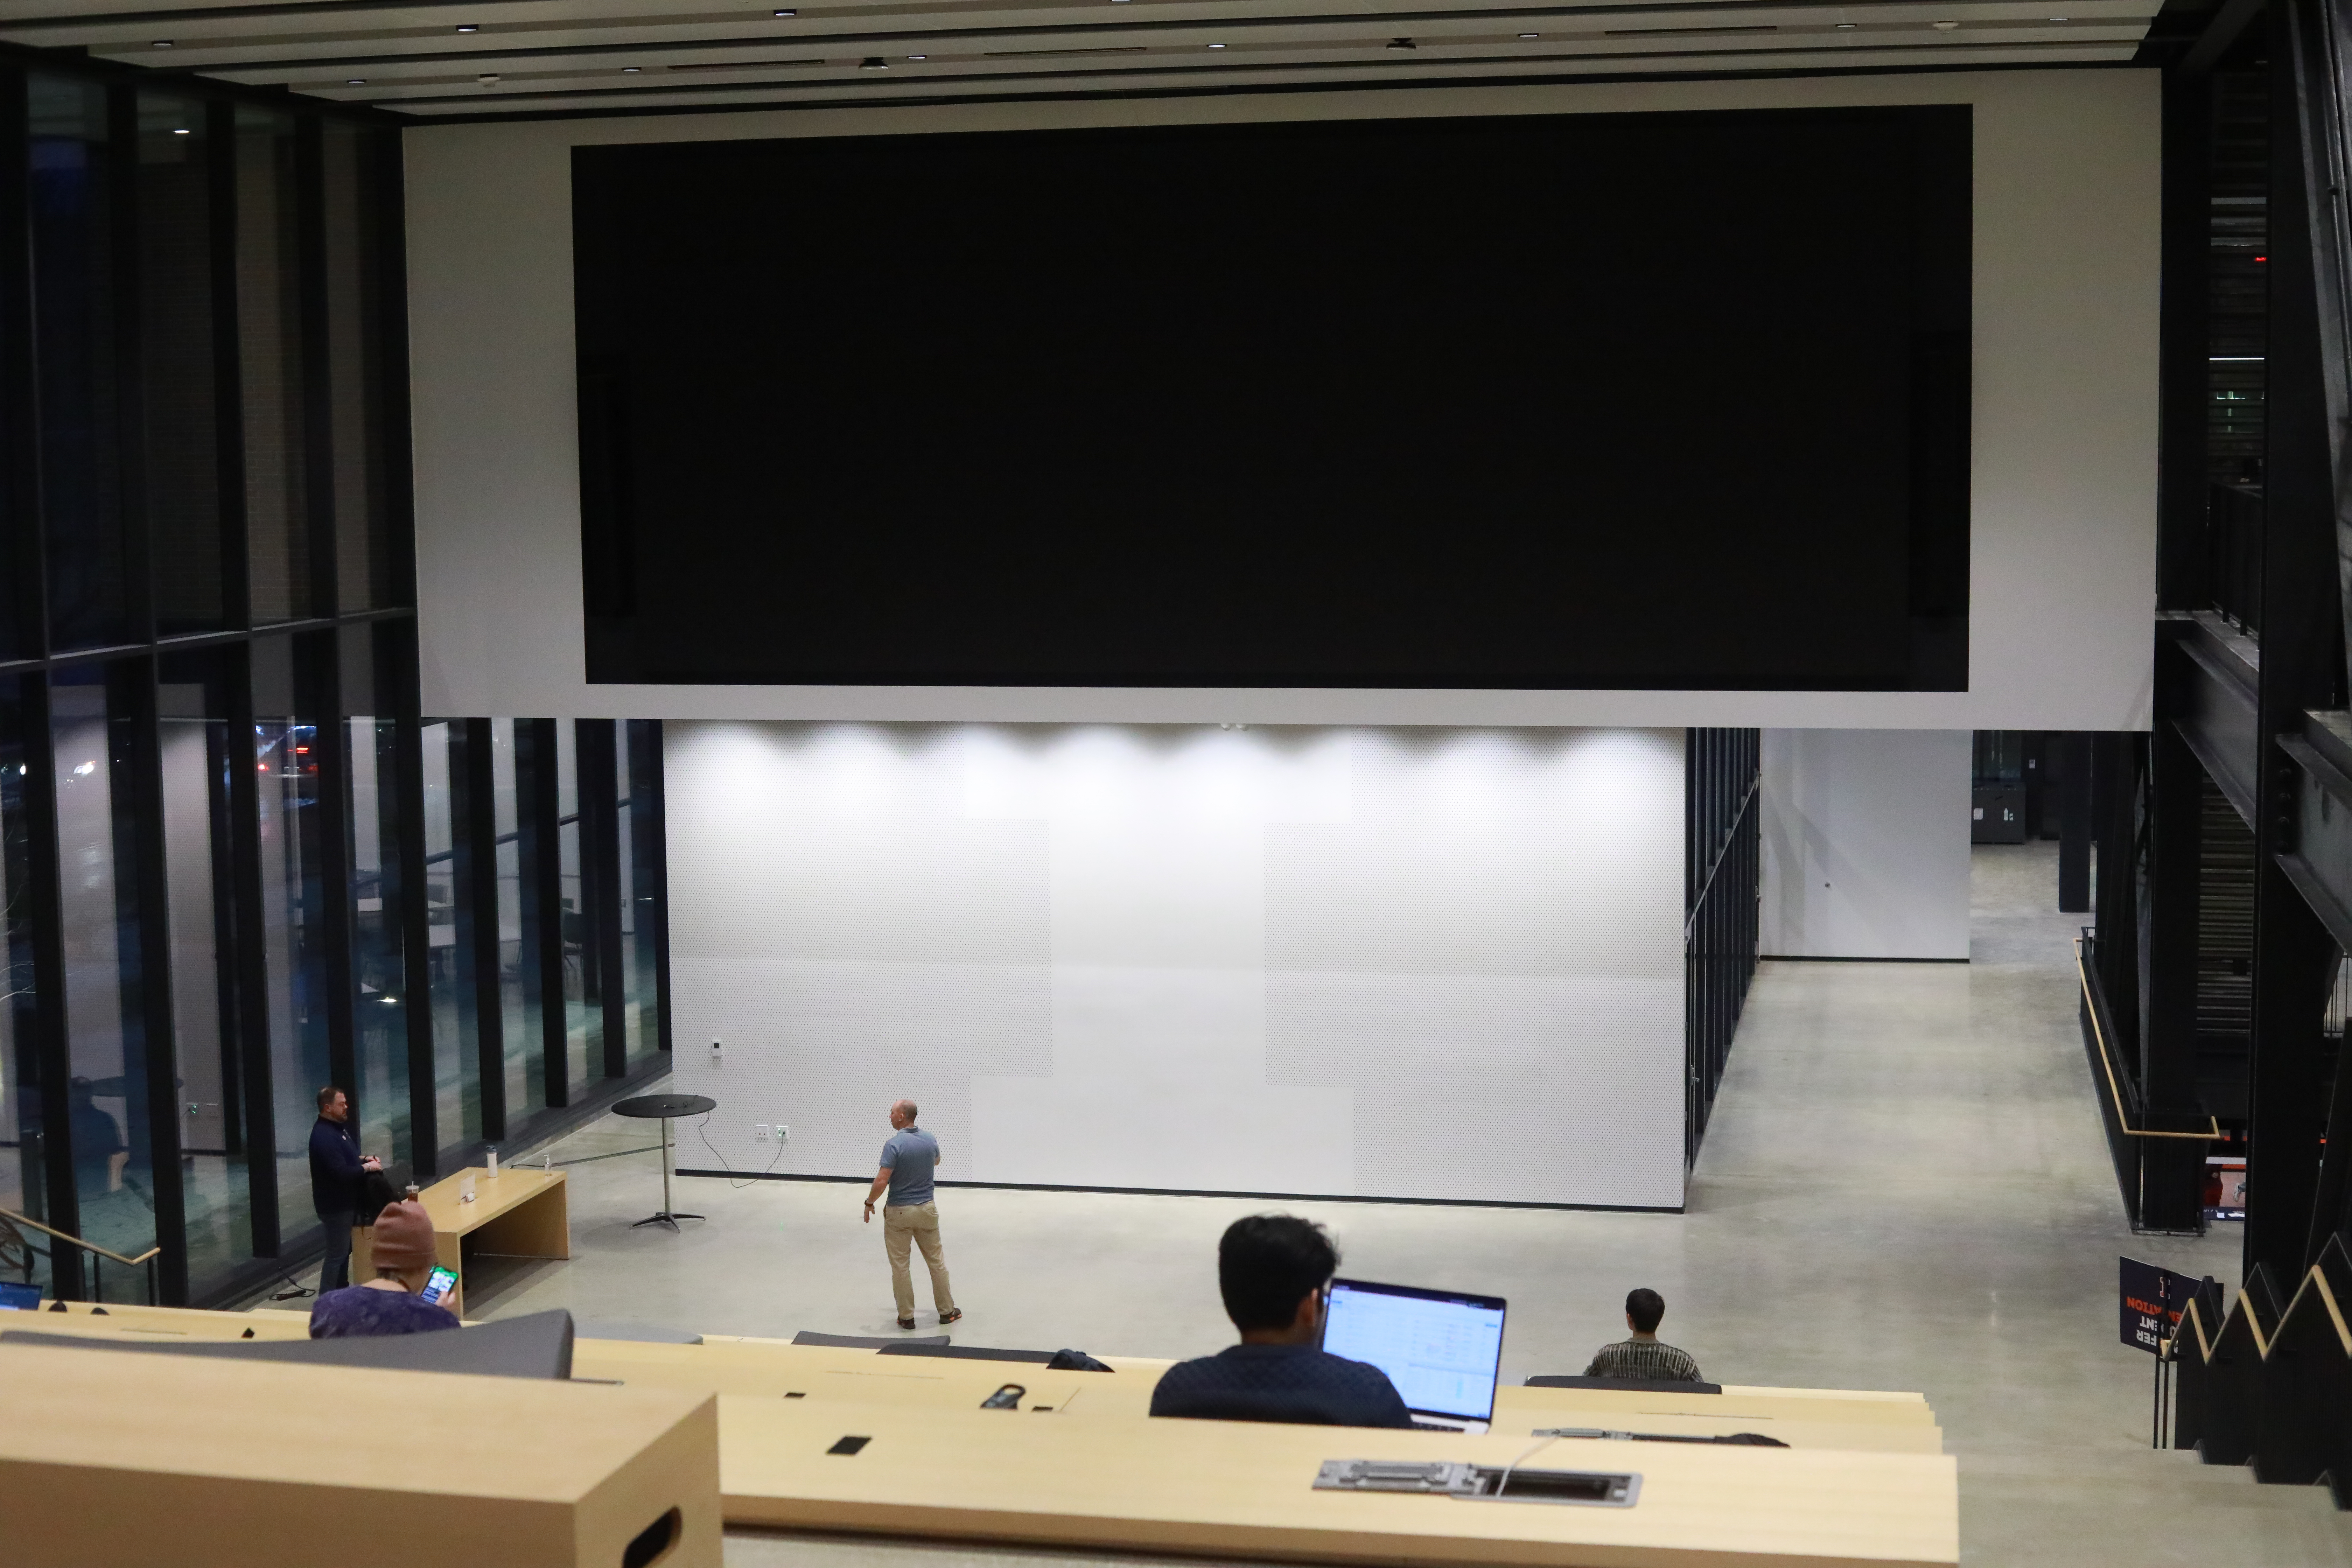 Large video board with students facing it